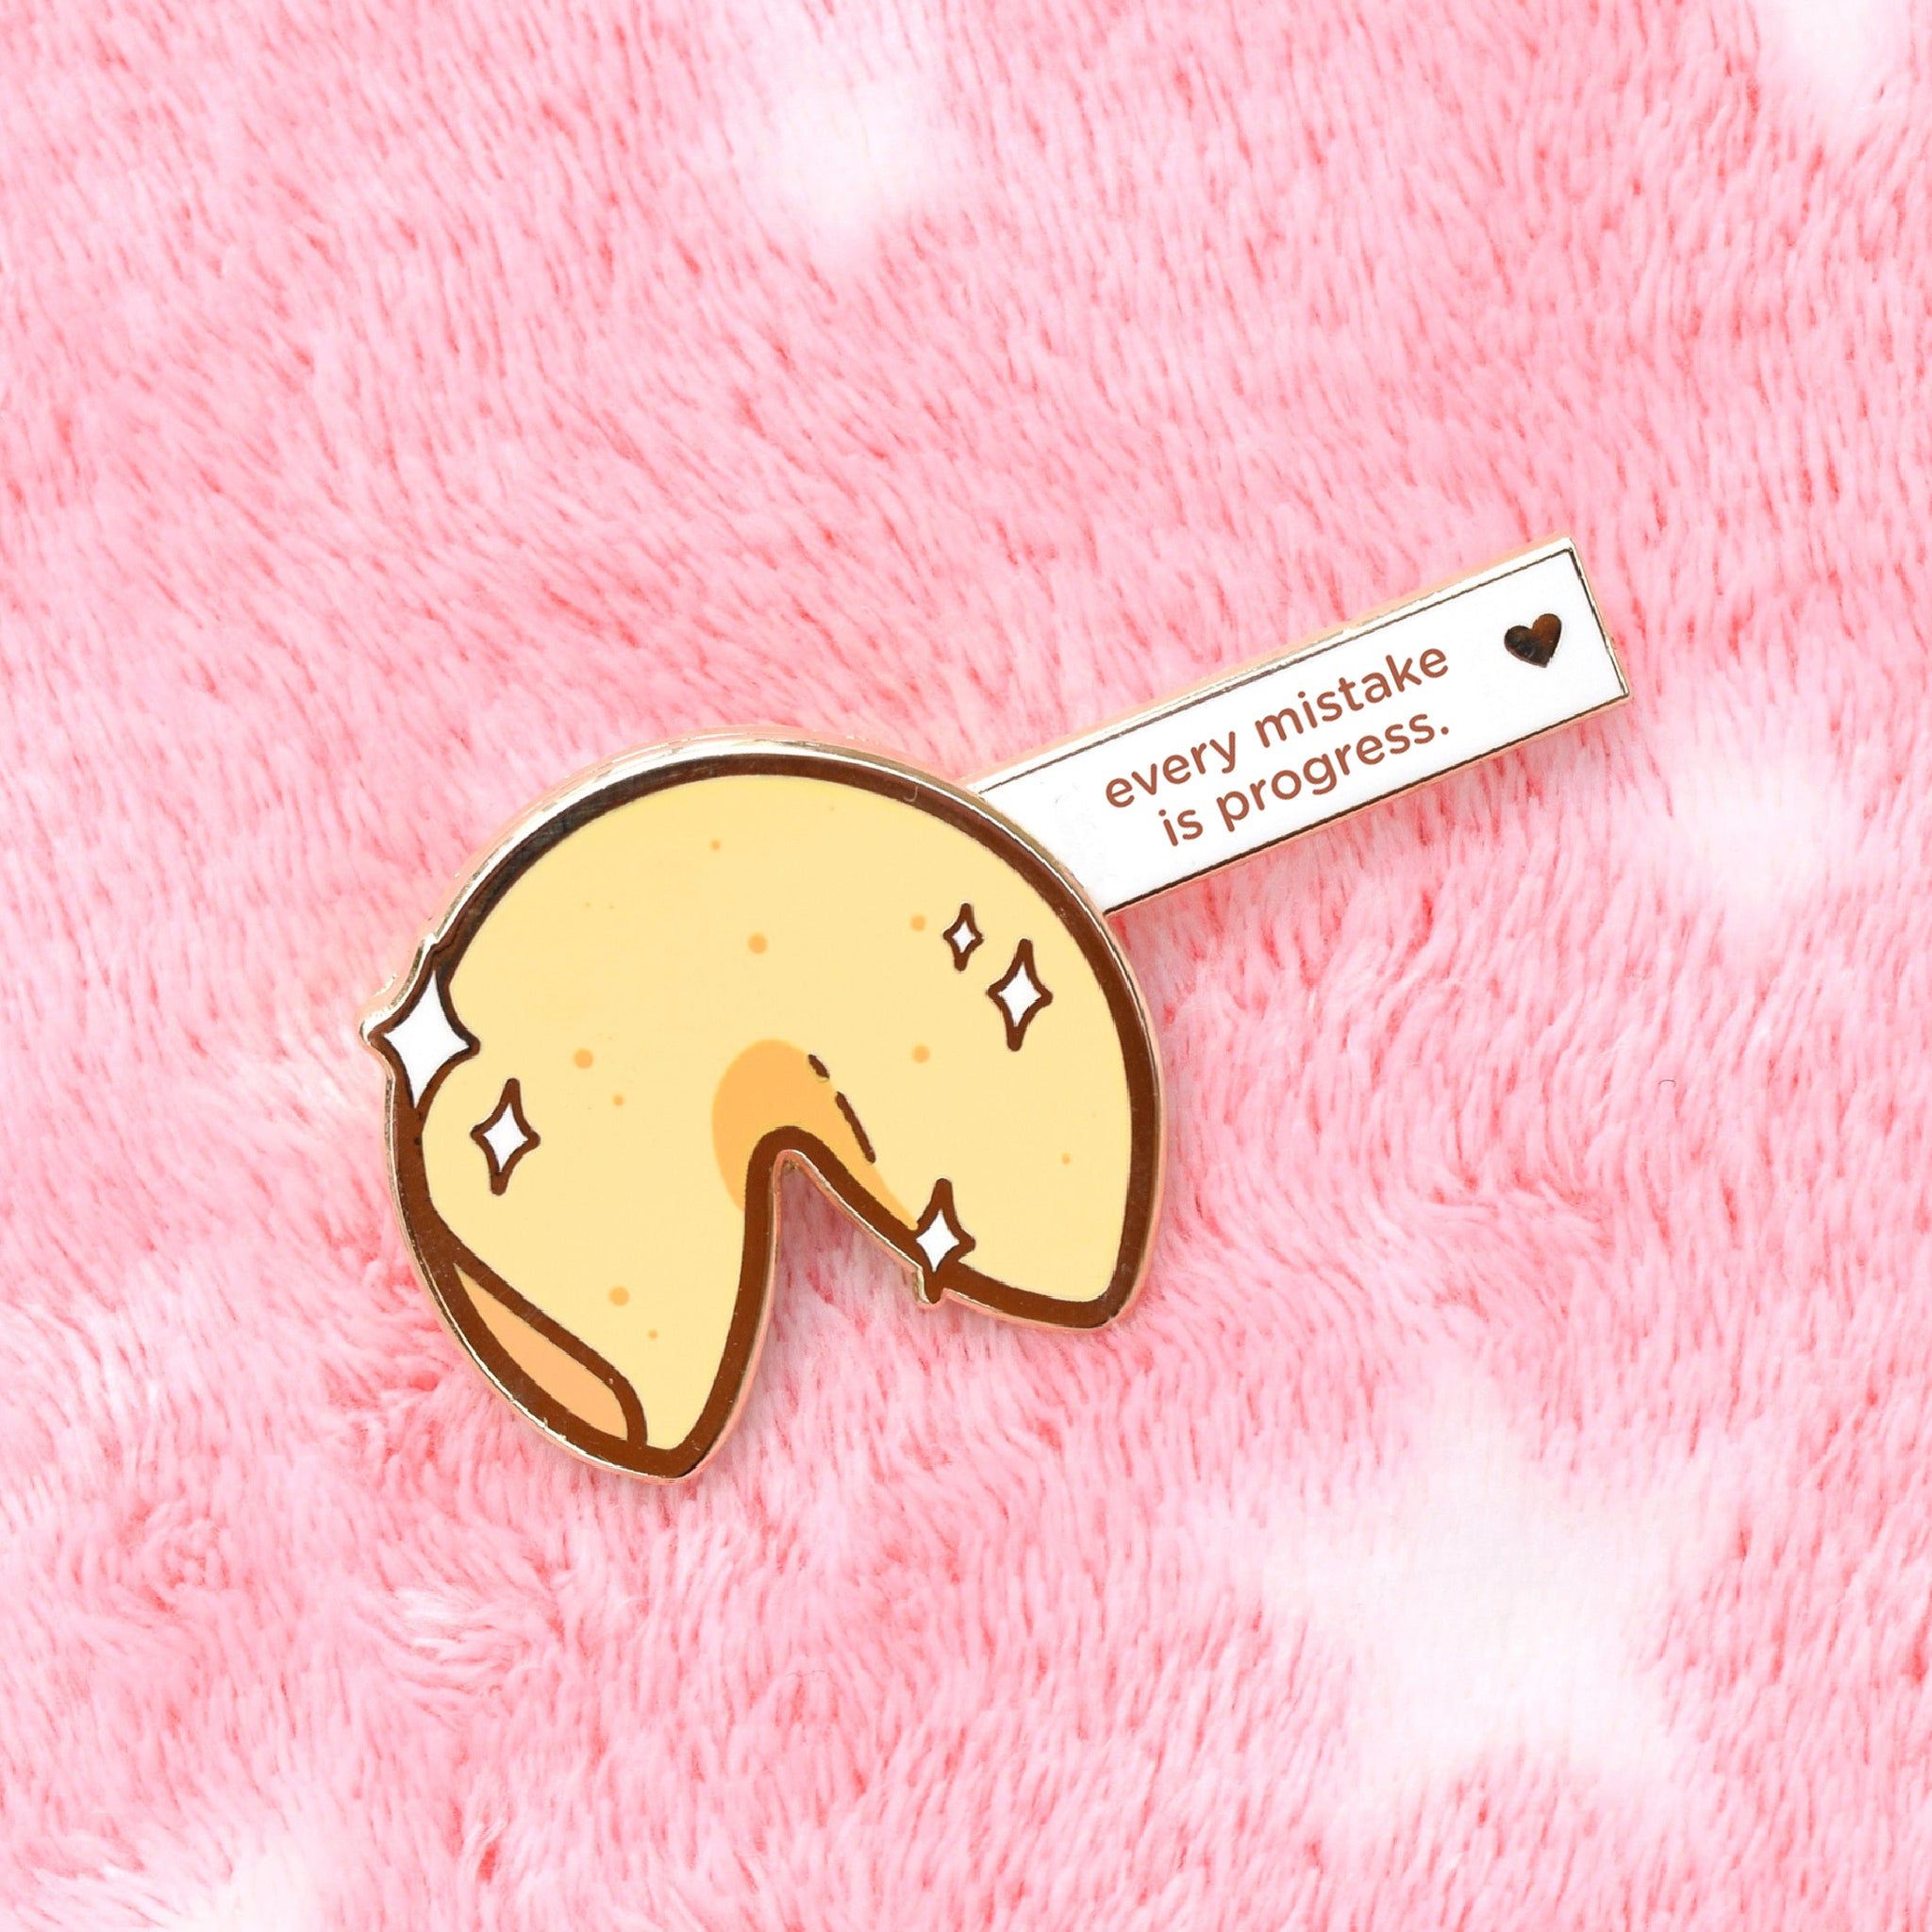 Fortune Cookie Slider Pin